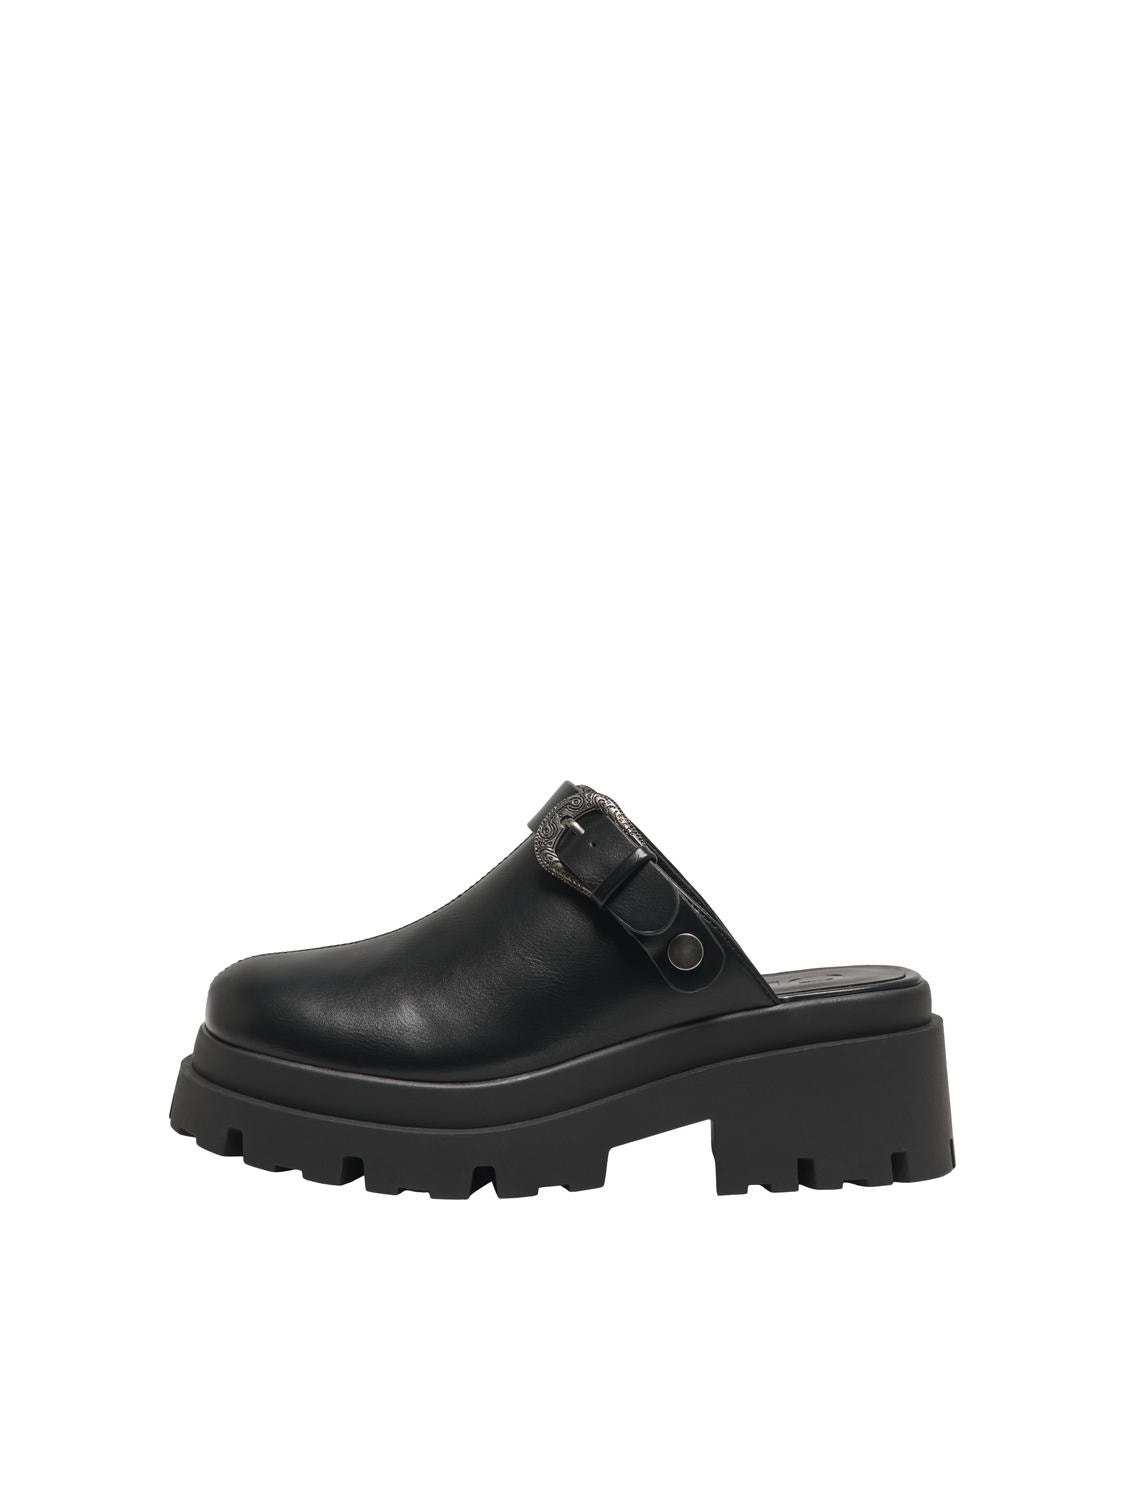 ONLY Shoe with buckle detail -Black - 15320042